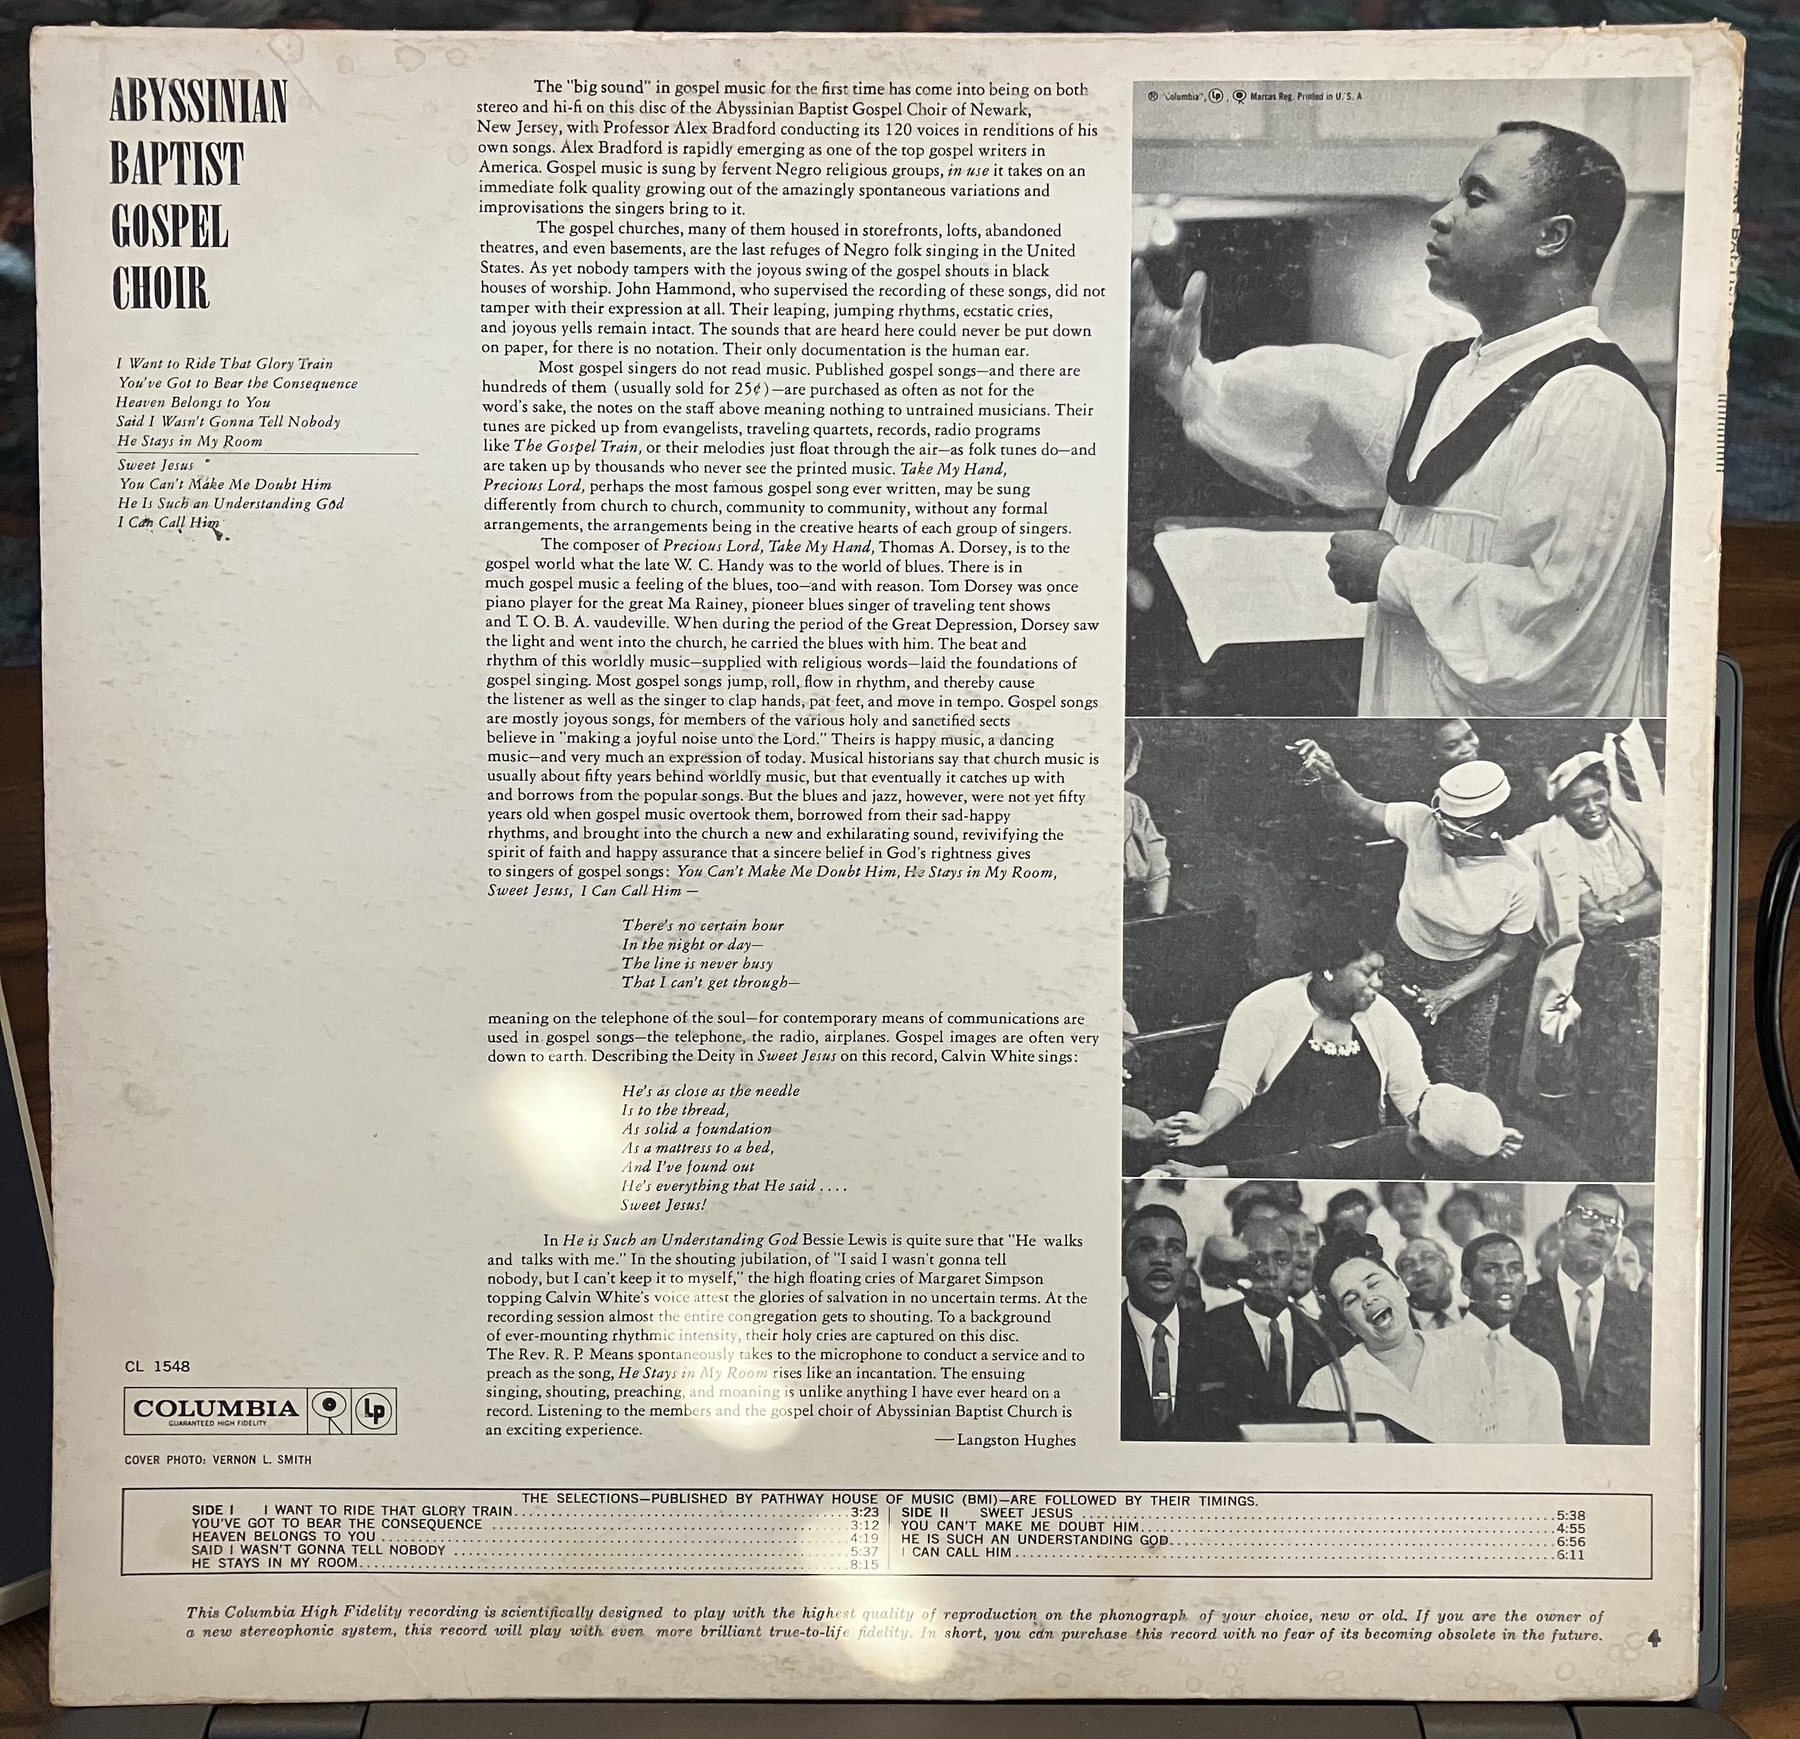 Backside of album cover with pictures of the choir singing and liner notes